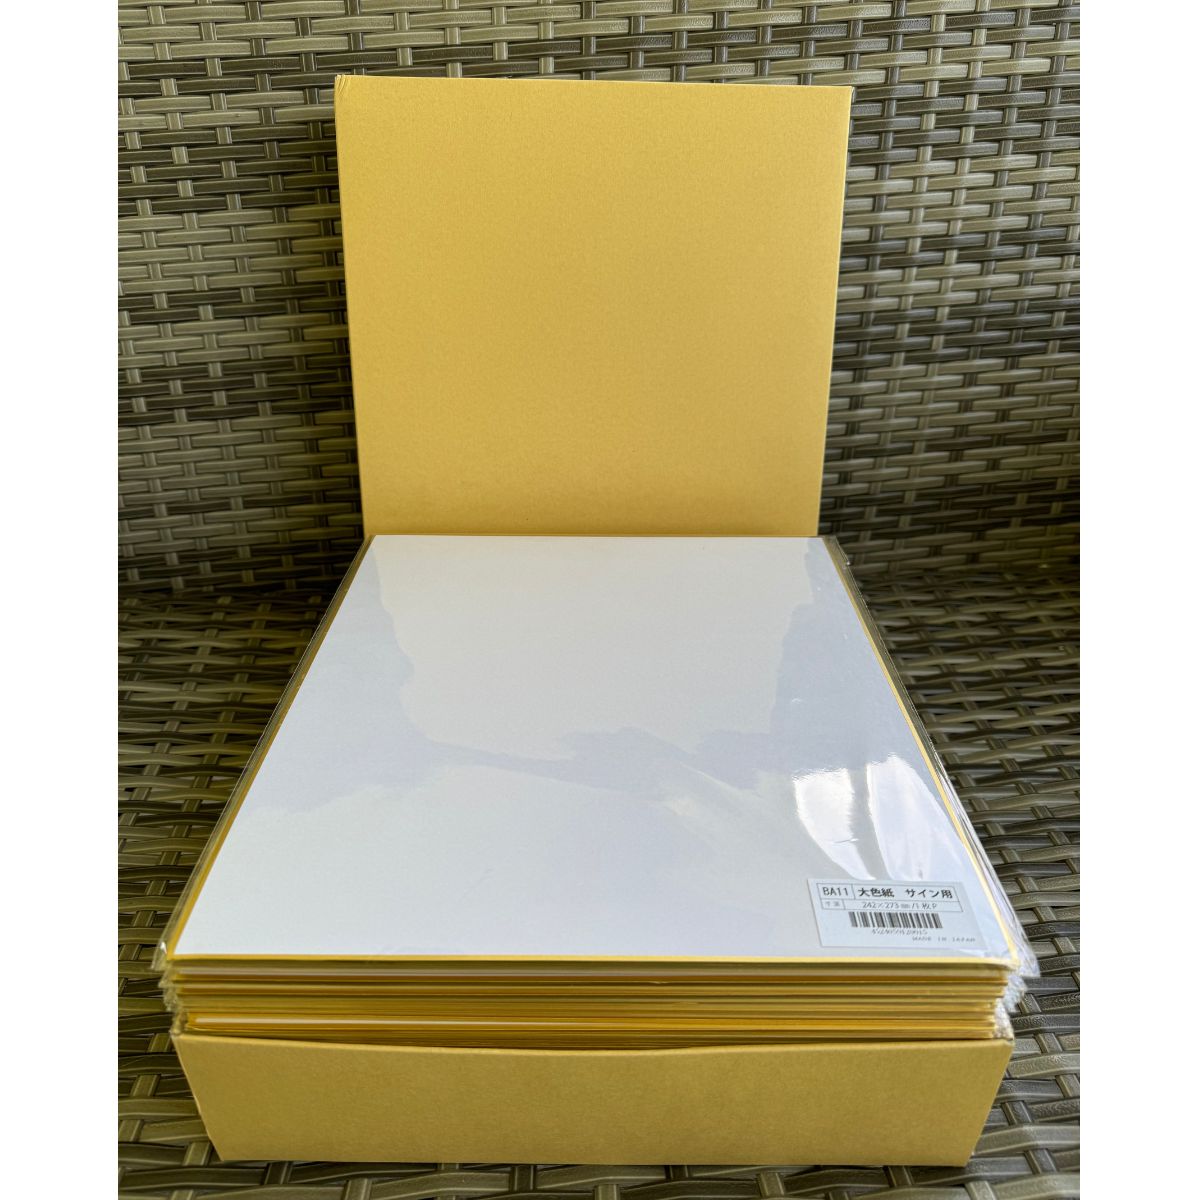 50 Shikishi Board Set 9.5 x 10.75" Gold Bordered for Japanese Art or Calligraphy (Pack of 50)